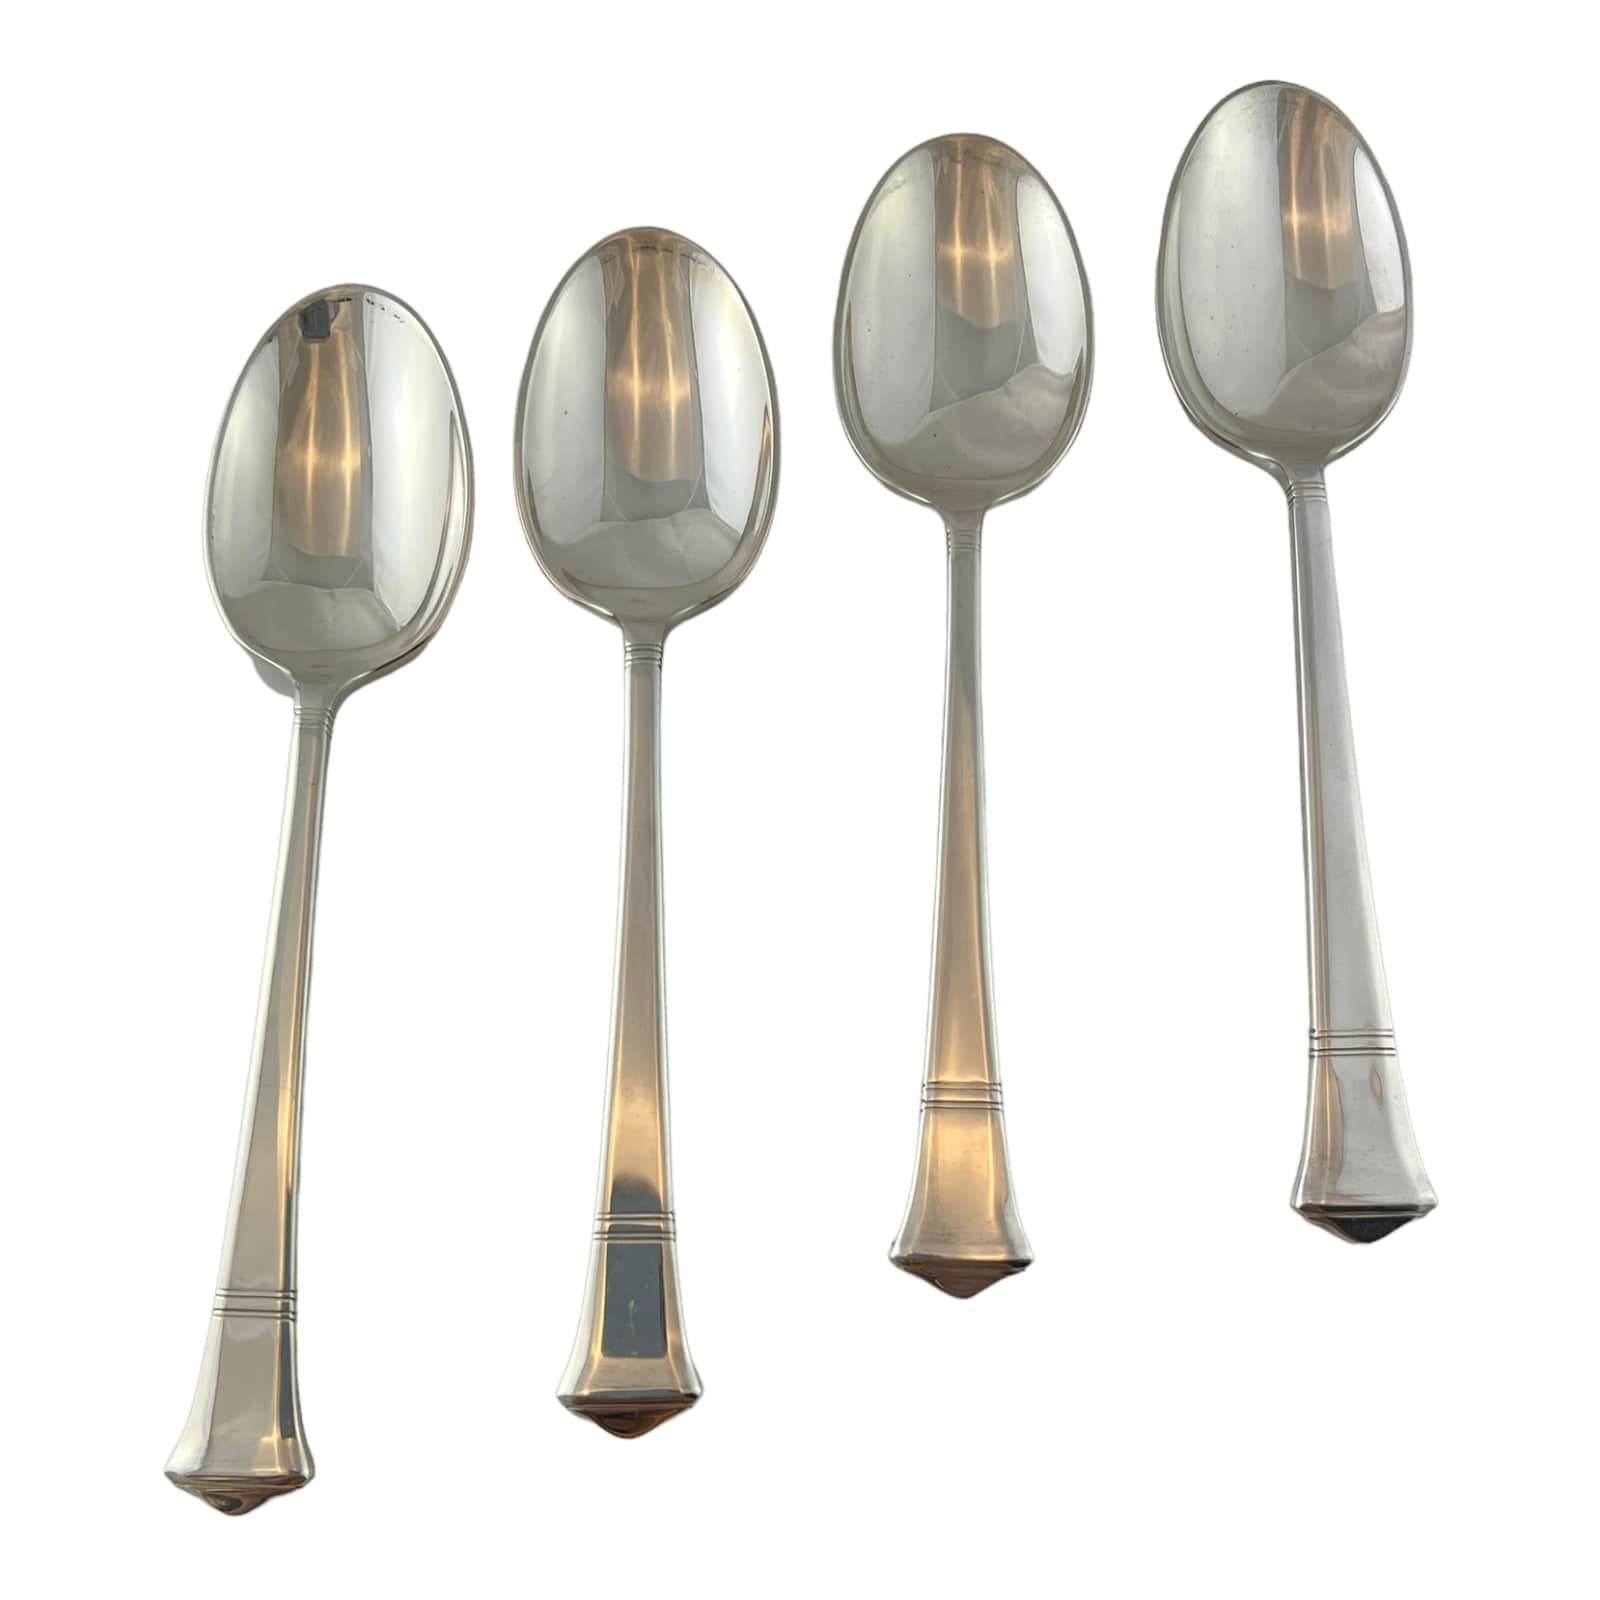 Set of 4 sterling silver teaspoons by Tiffany & Co in the Windham pattern.

No monogram.

Beautiful set of teaspoons in the Windham pattern which was in produced in 1923 and designed by Aurthur LeRoy Barney. The pattern's simple and elegant